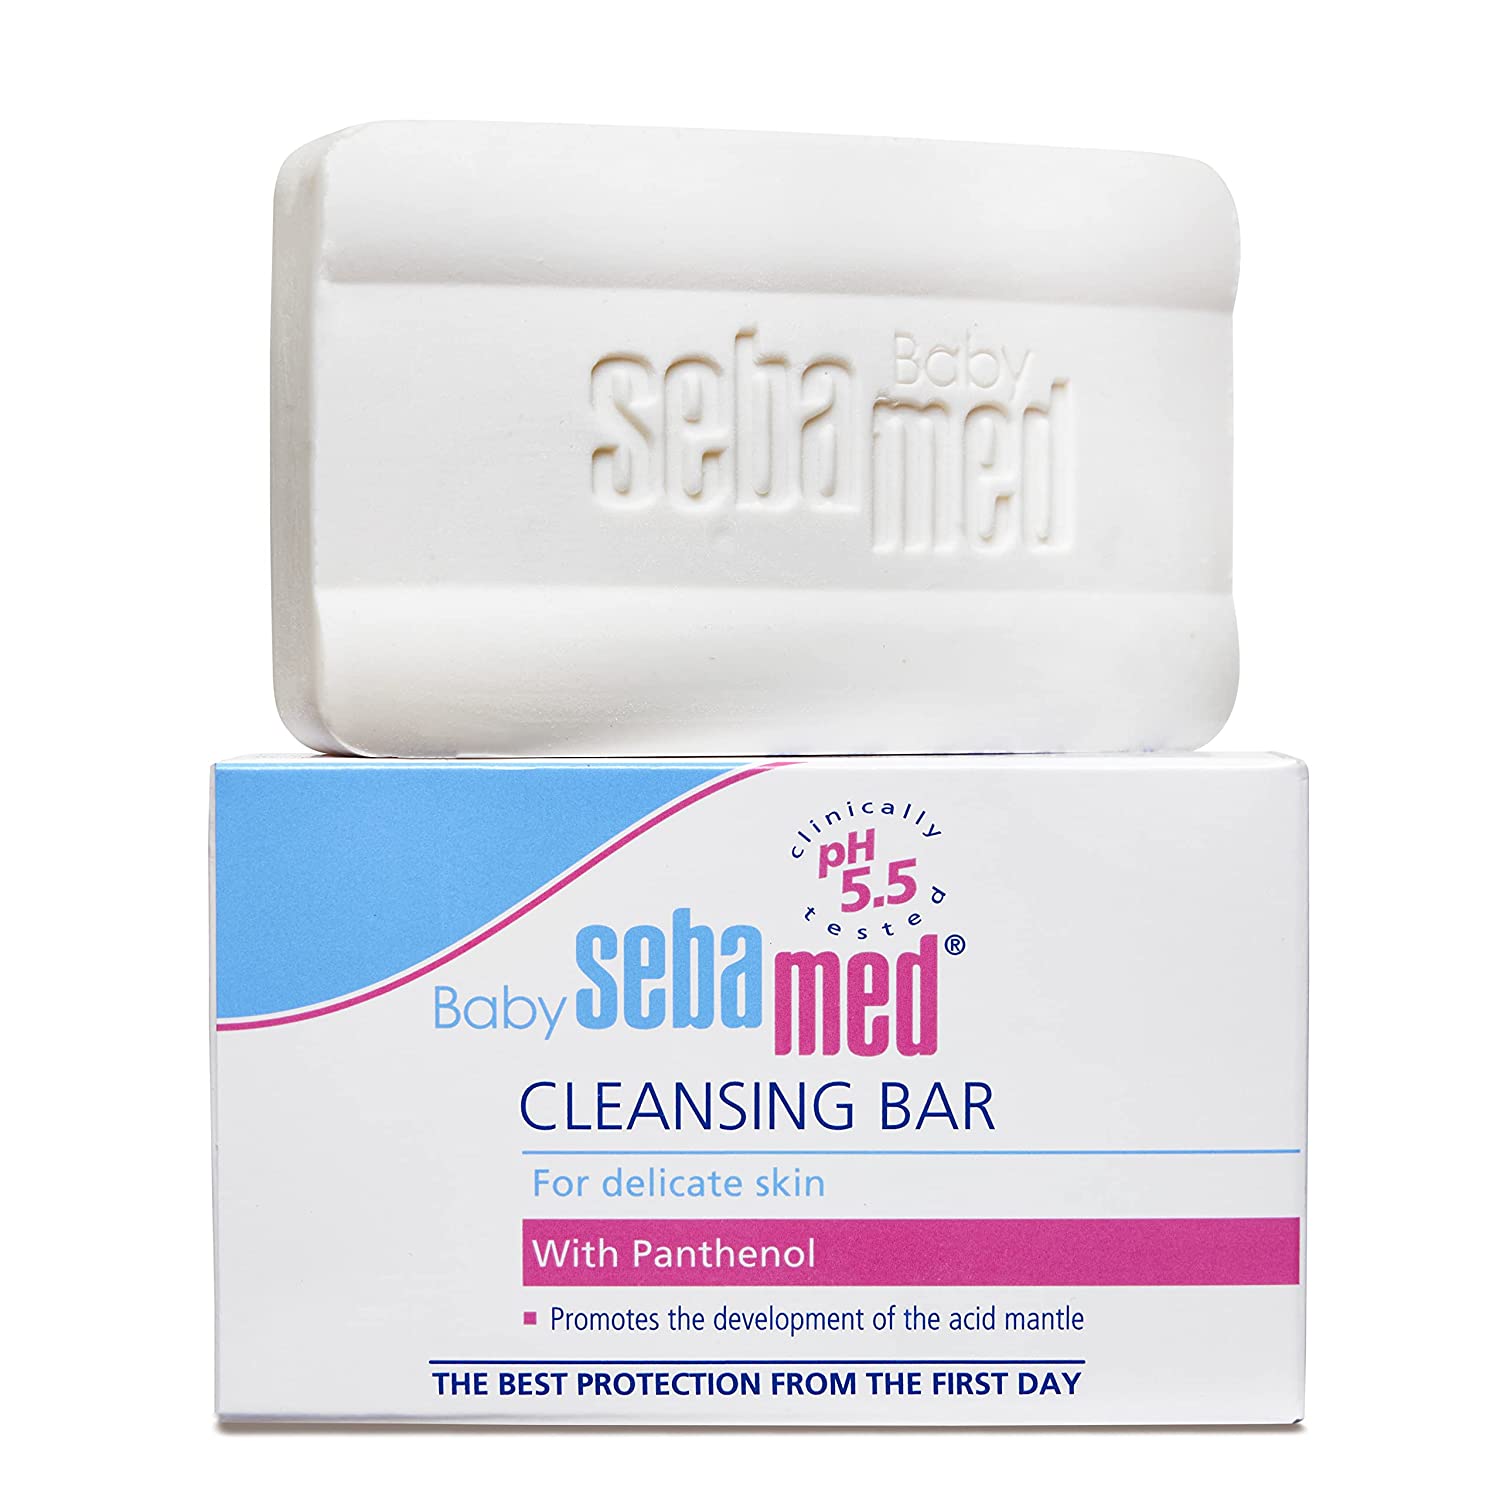 Sebamed Baby Cleansing Bar 150g|Ph 5.5 | With Panthenol|No tears & Soap Free bar| For Delicate skin